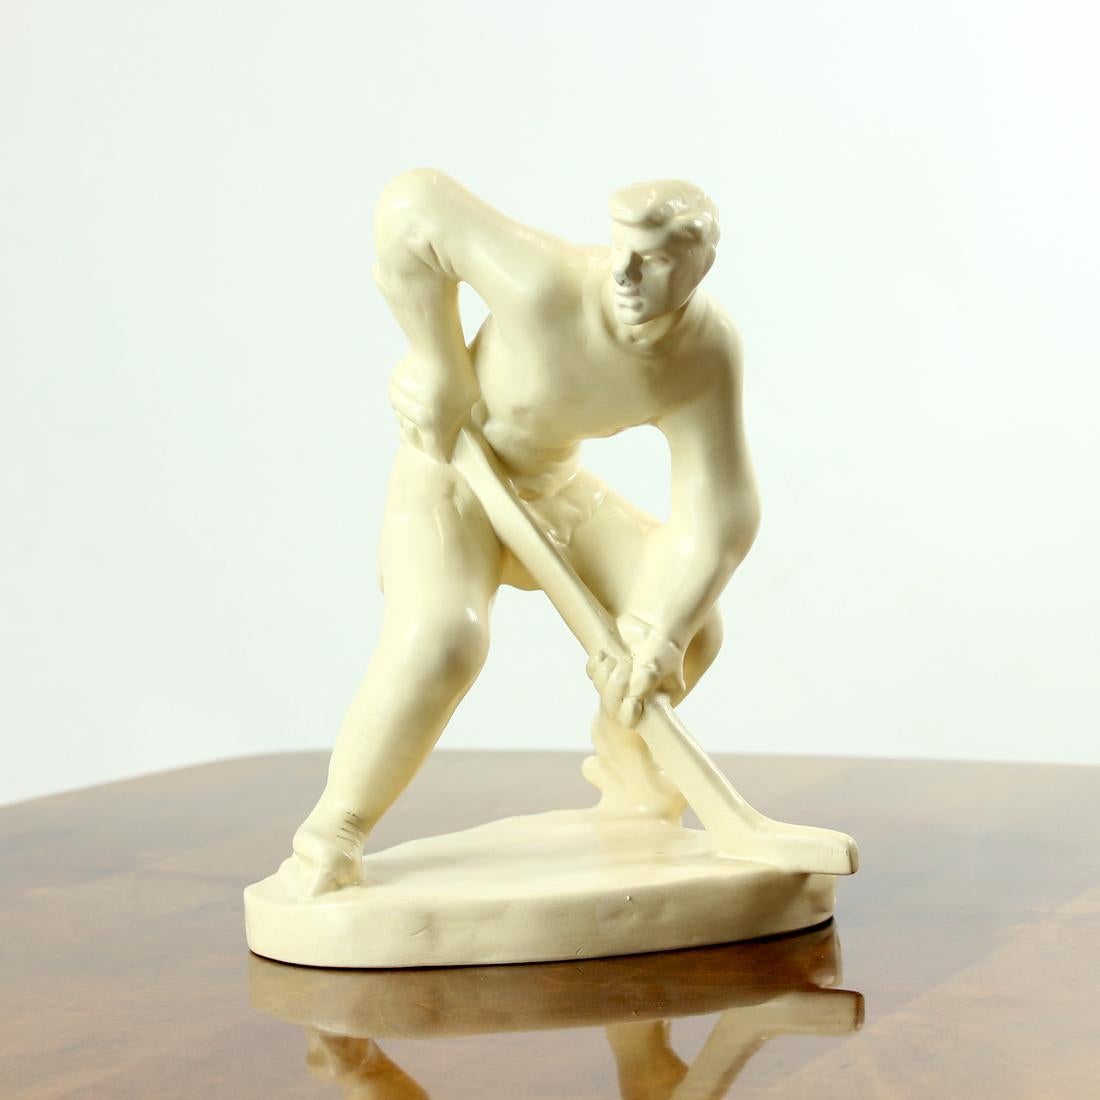 Beautiful and elegant statue of a hockey player. Produced by Jihokera in 1960s. The tature is marked by the designer Brada on the stand. The sculpture is produced out of off-white plaster with glazed top. Beautiful detailed work with details on the